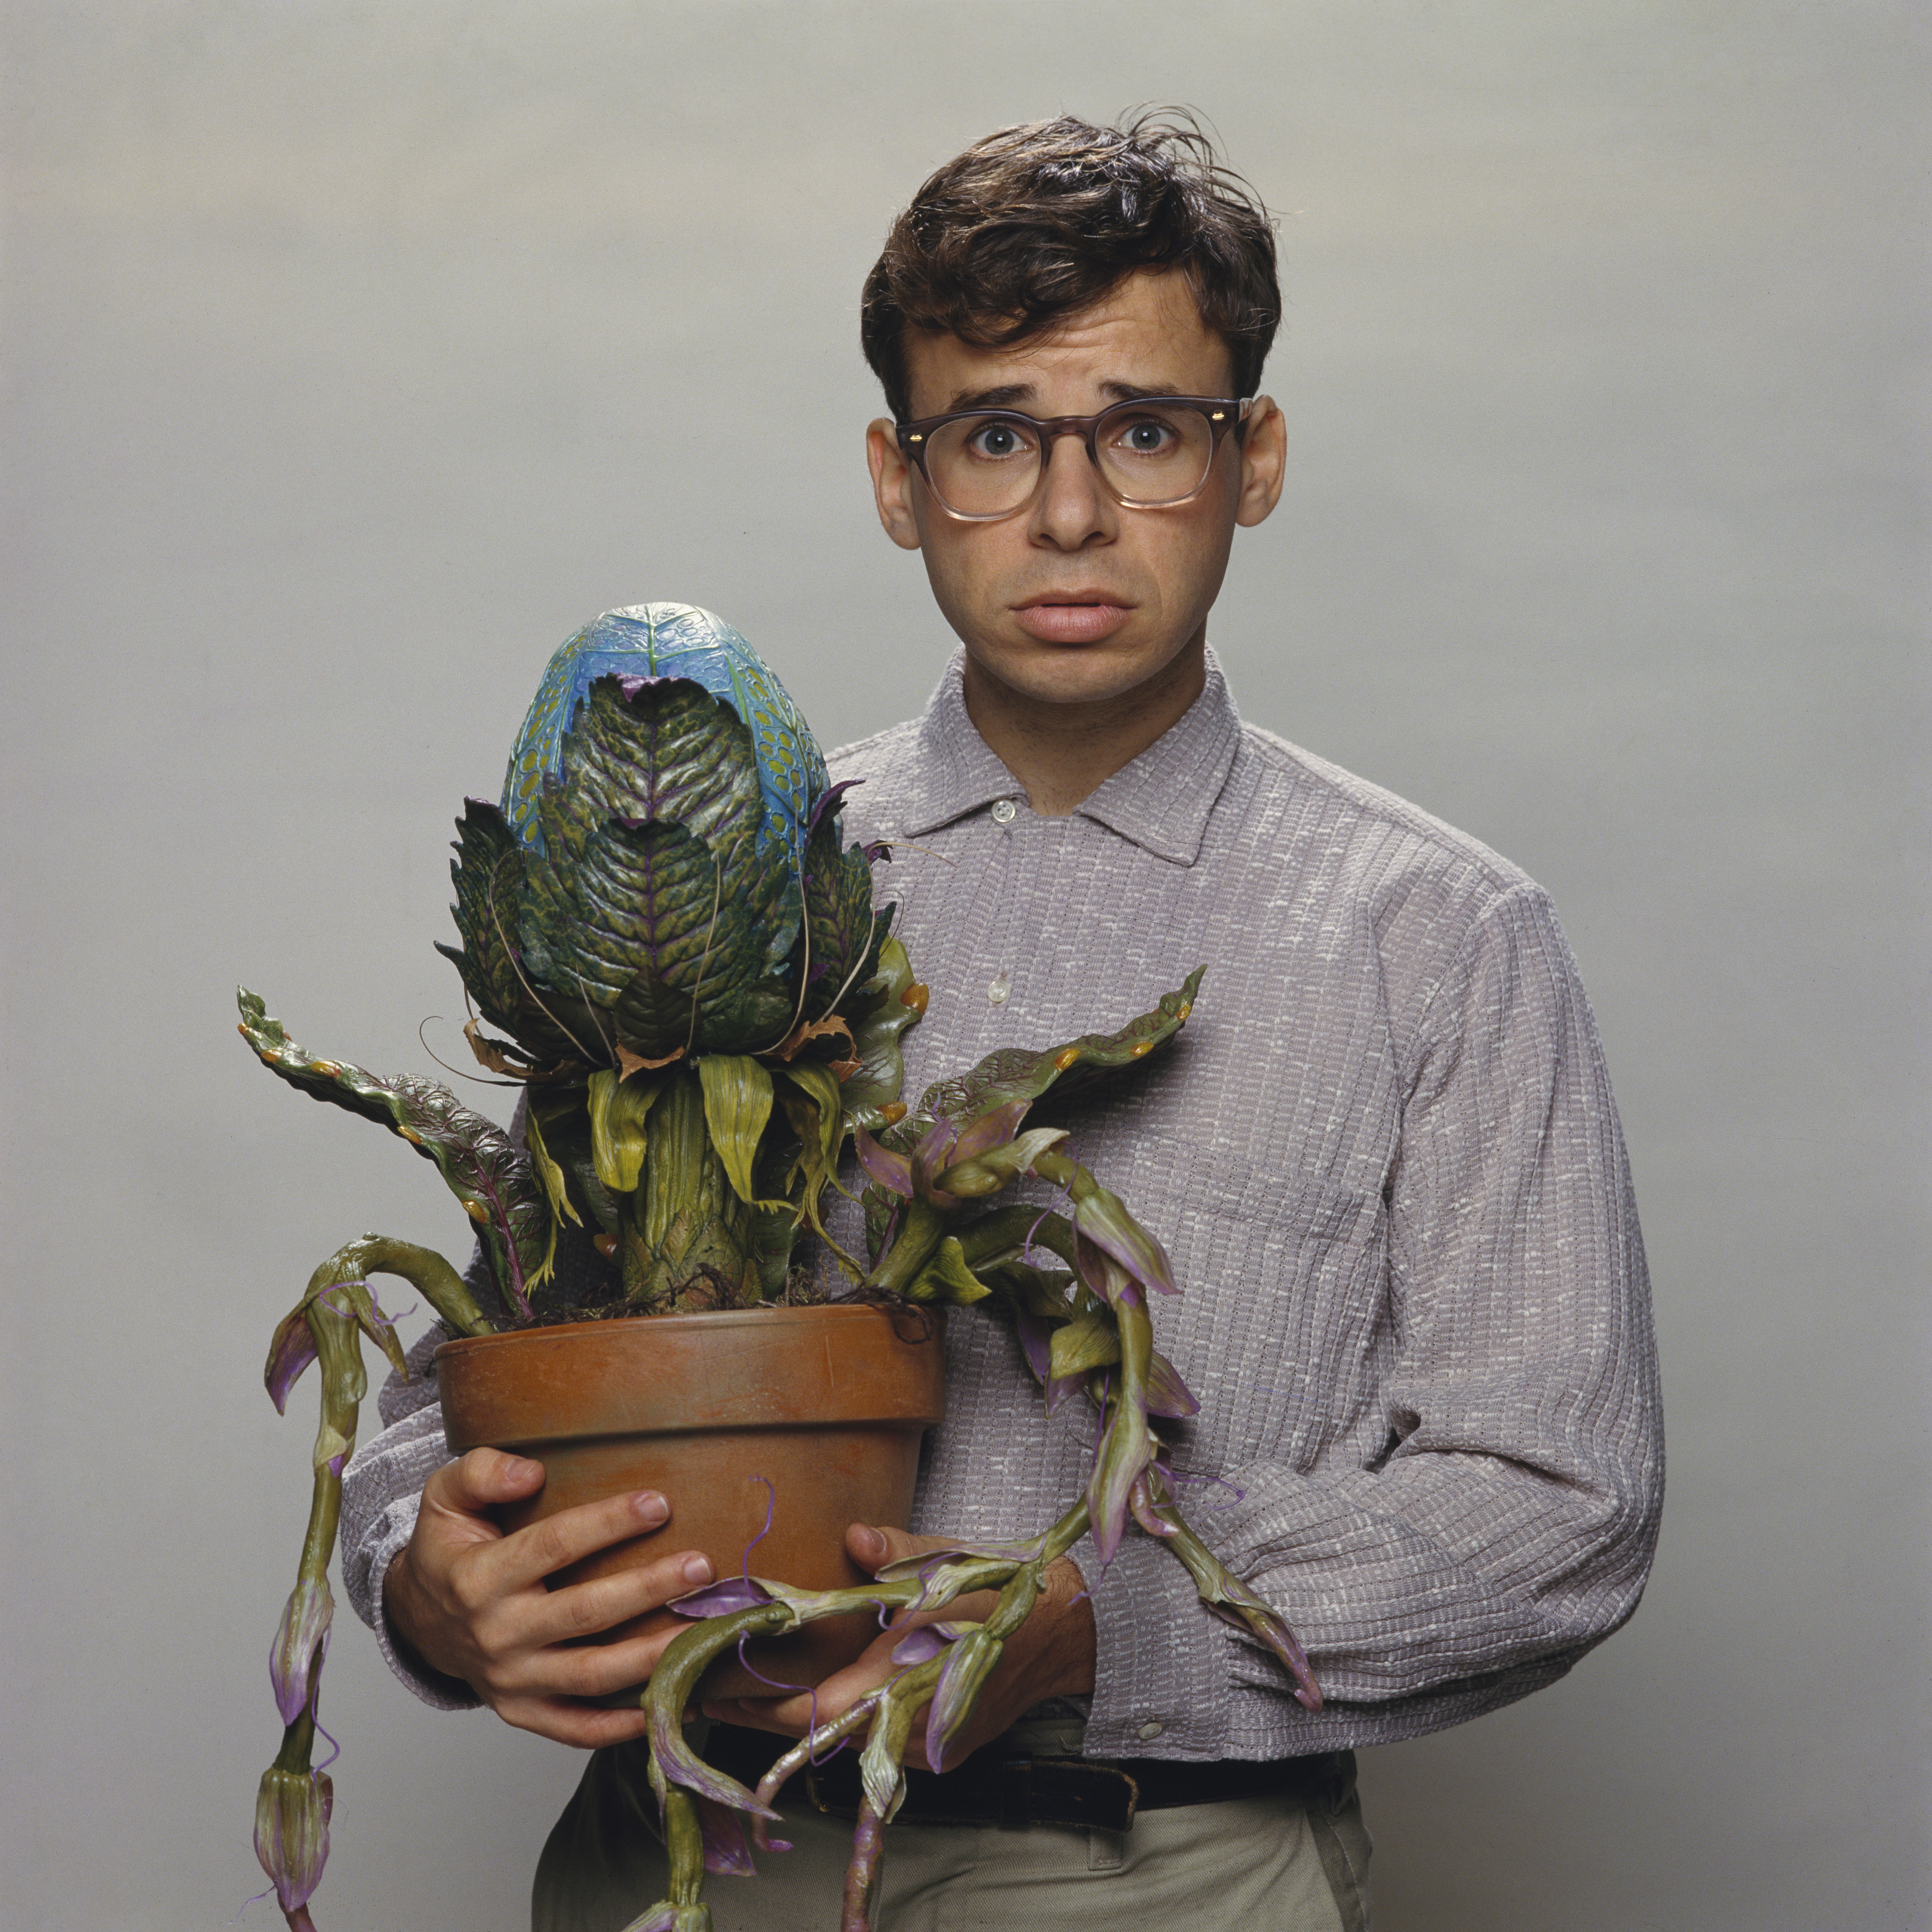 Rick Moranis in the set of "Little Shop of Horrors," 1986 | Source: Getty Images